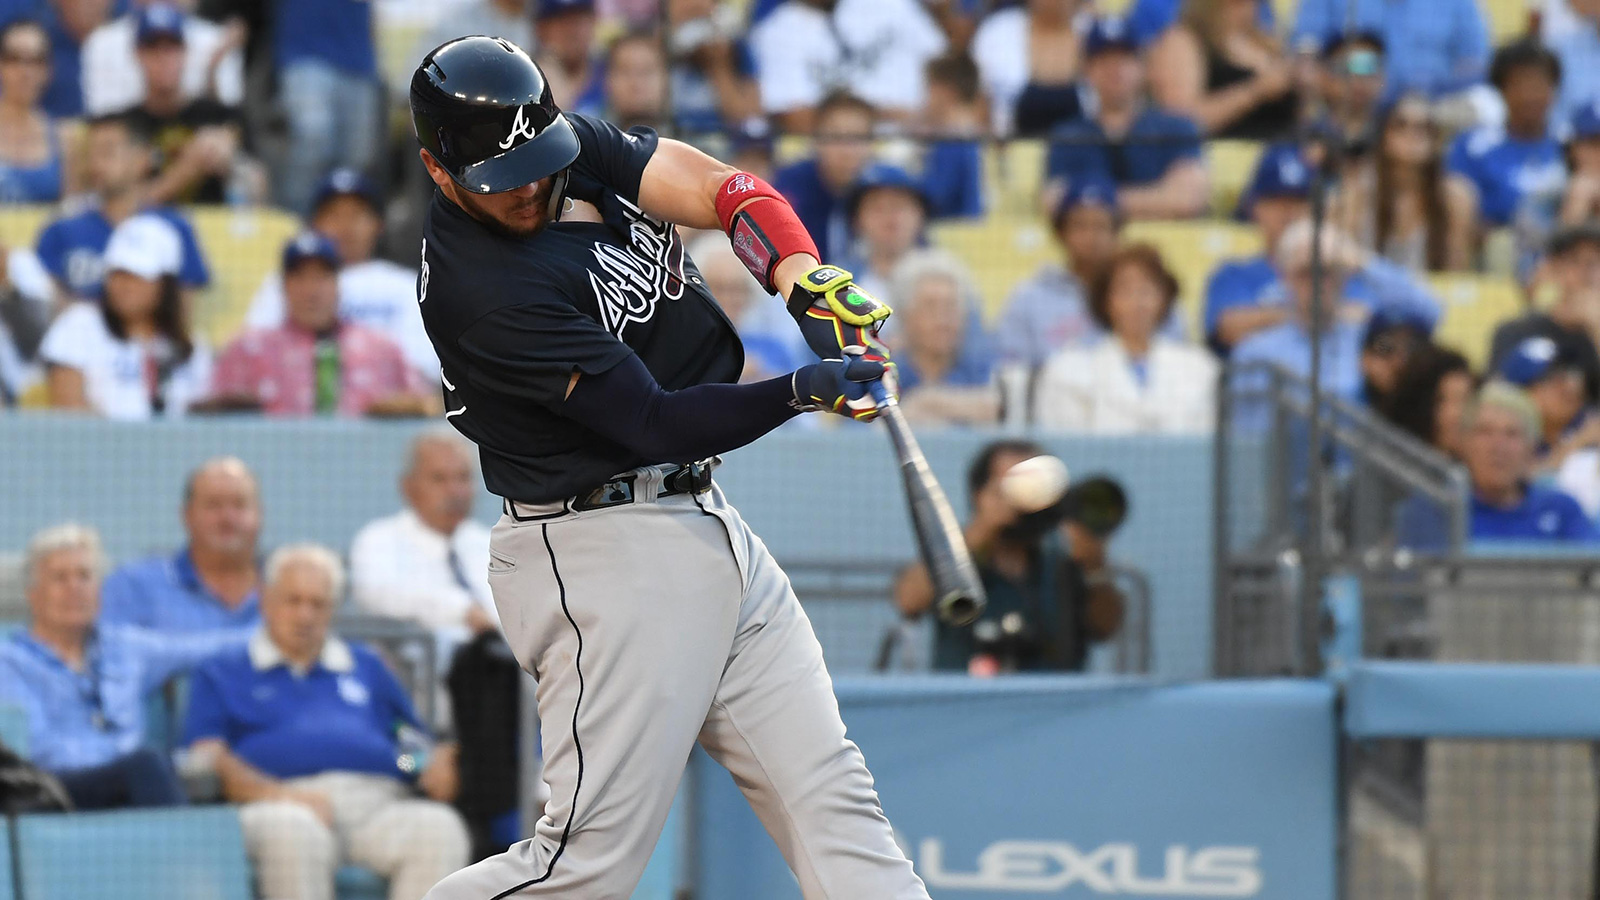 Three Cuts: Braves’ catching duo remains among MLB’s premier bargains